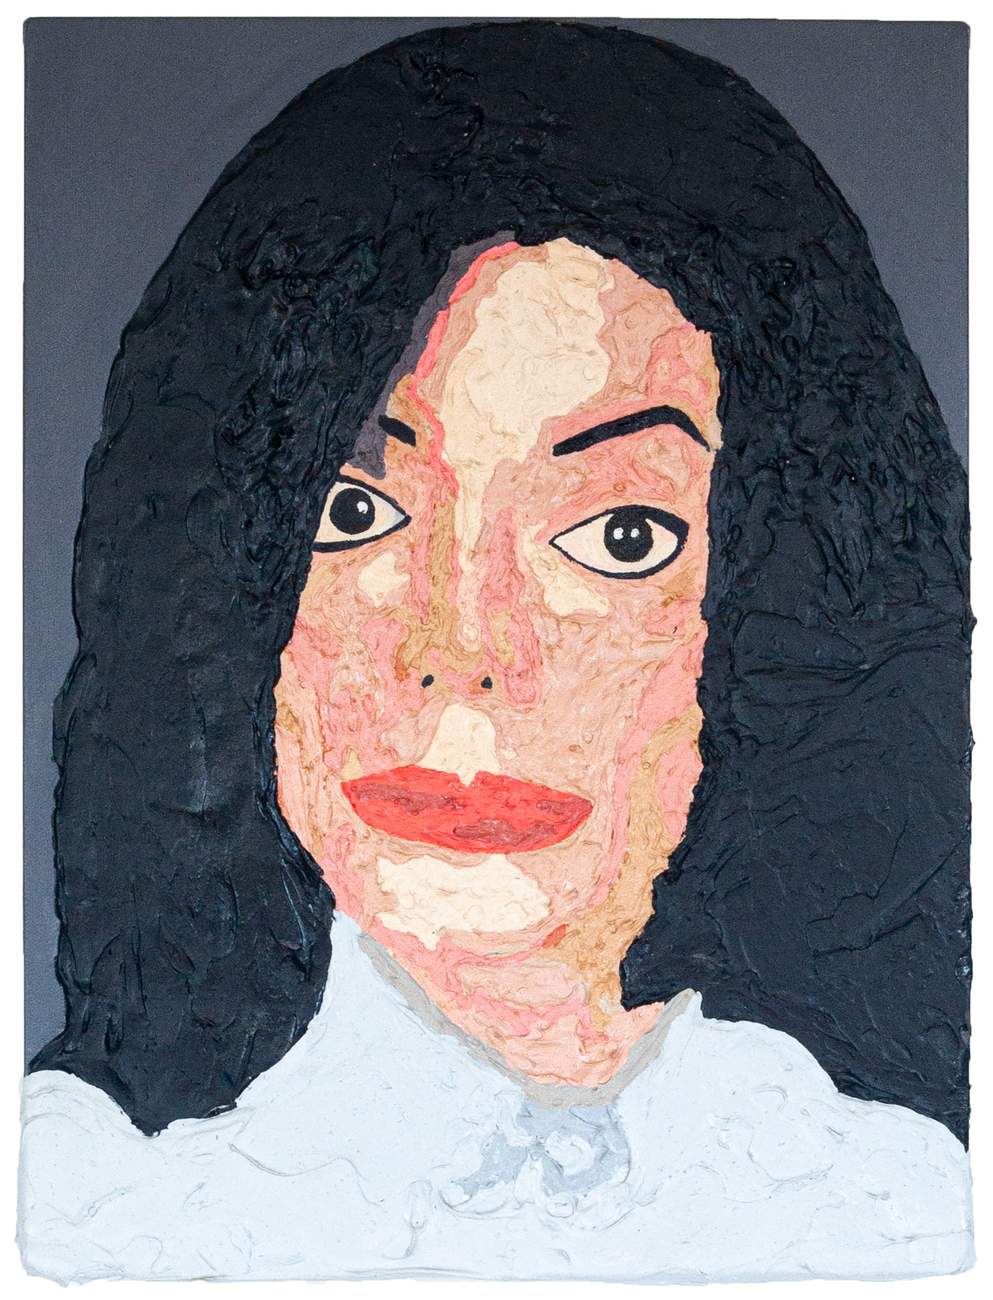 Preview image for Mugshot 8 (Micheal Jackson)